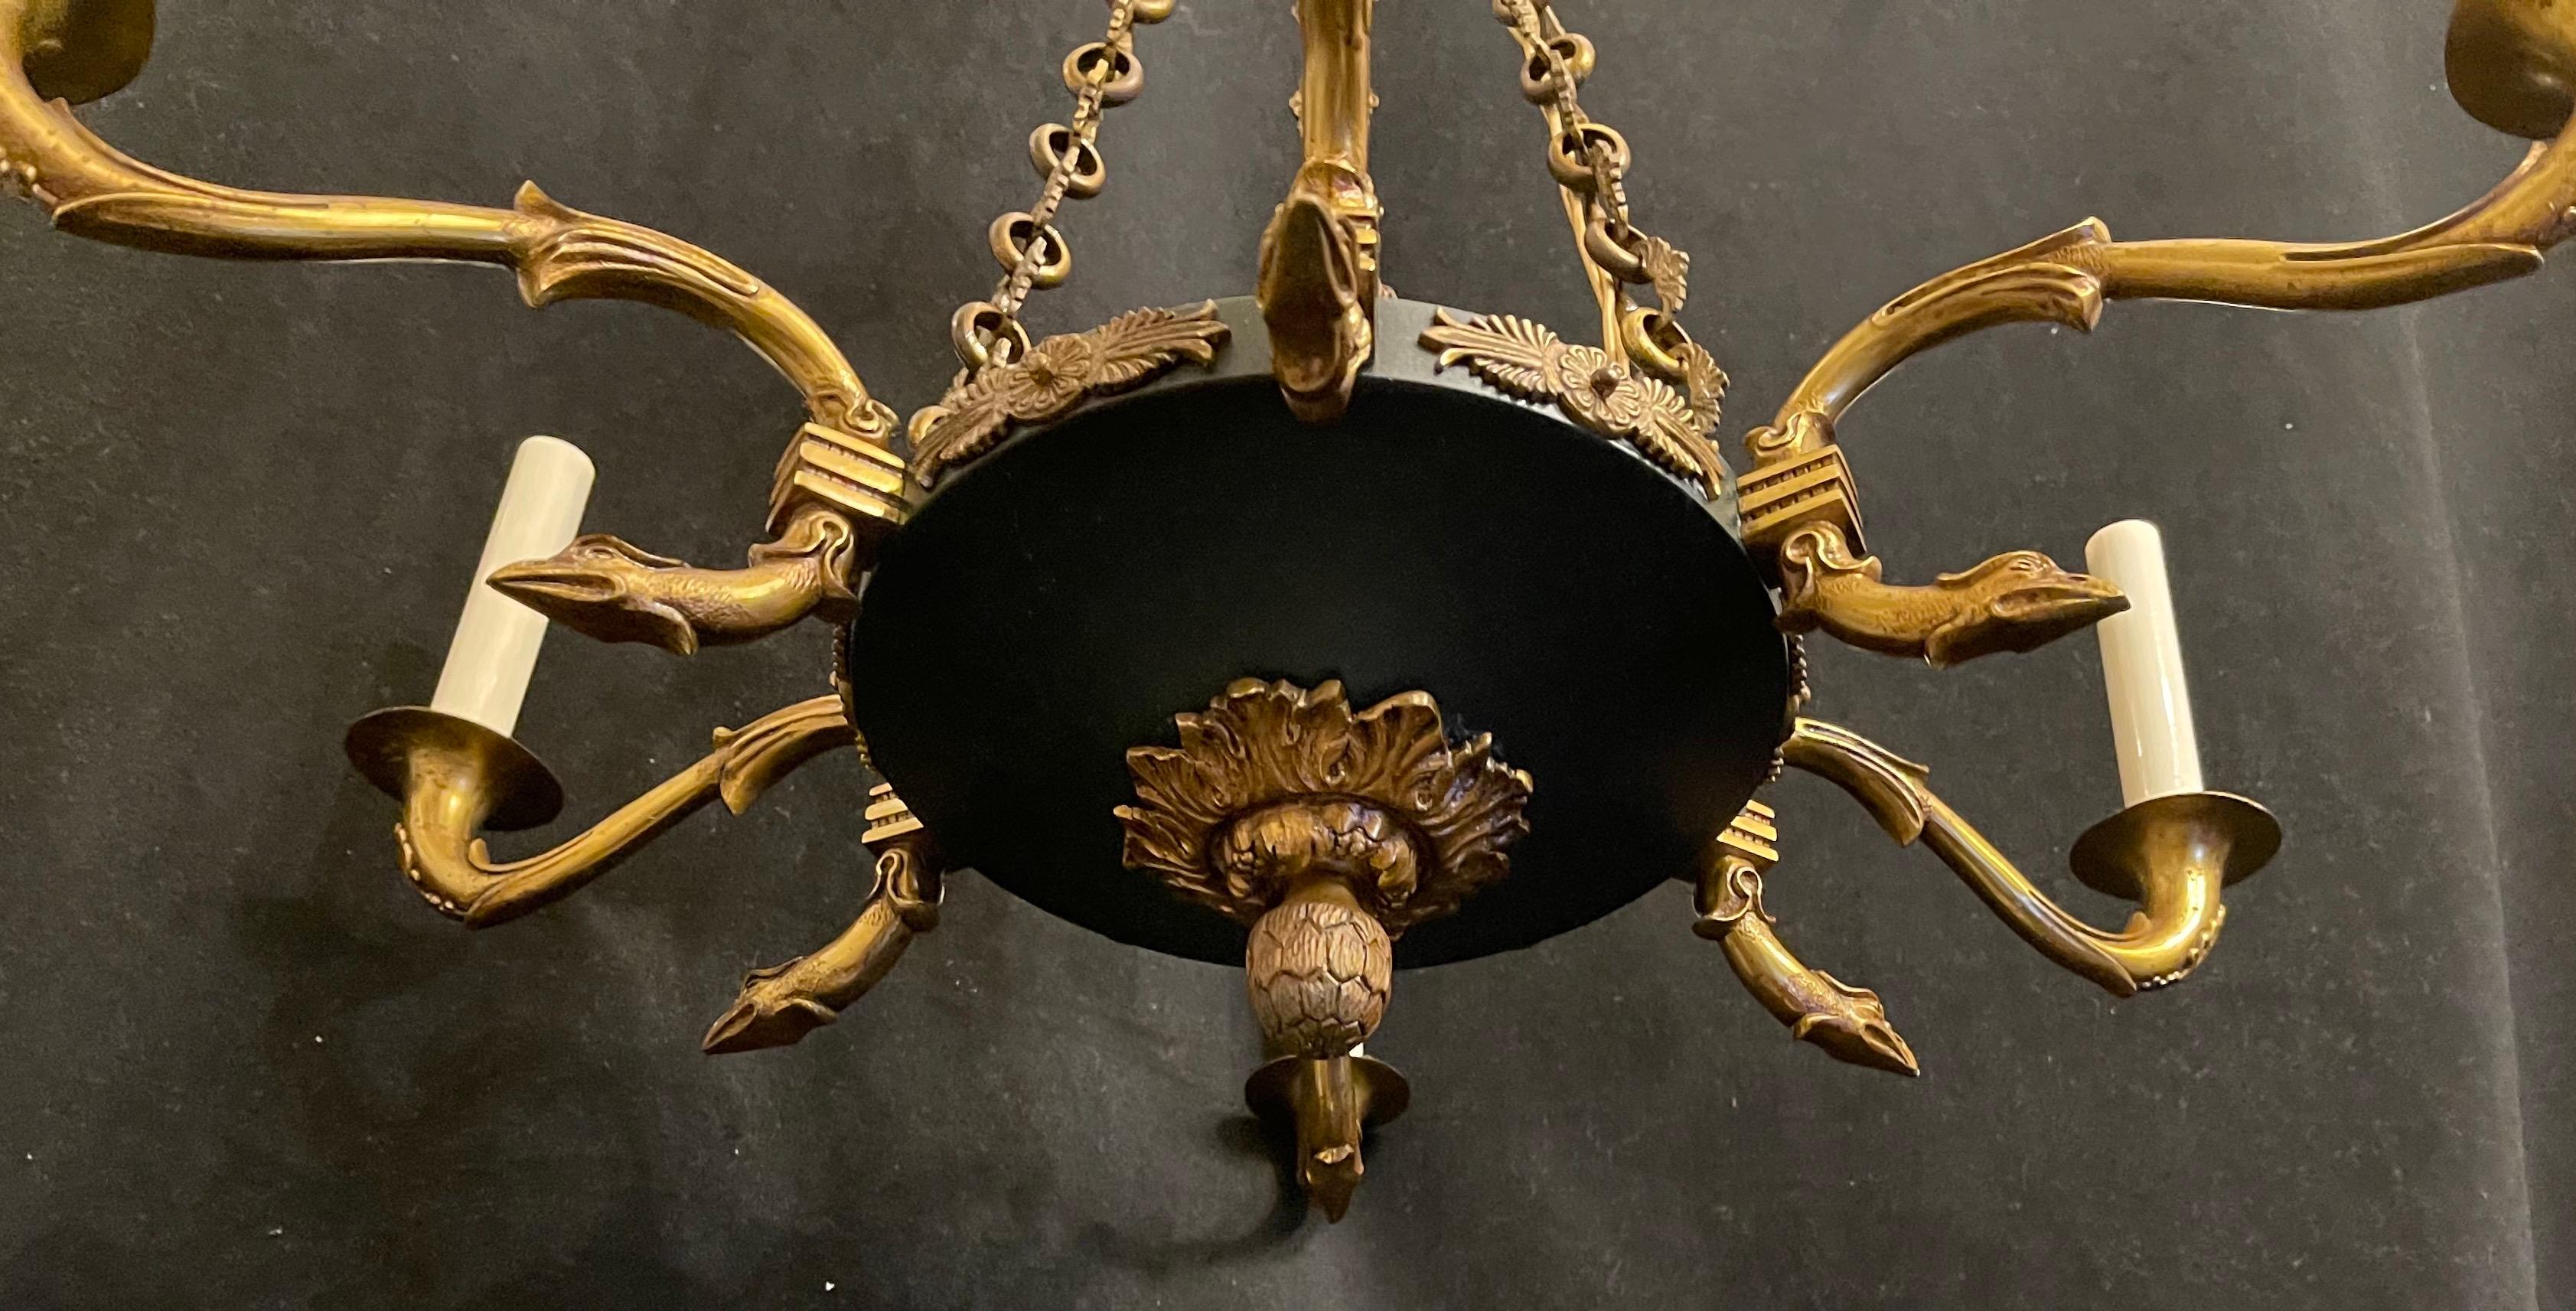 20th Century Wonderful French Empire Neoclassical Patinated Ormolu Bronze Chandelier Fixture